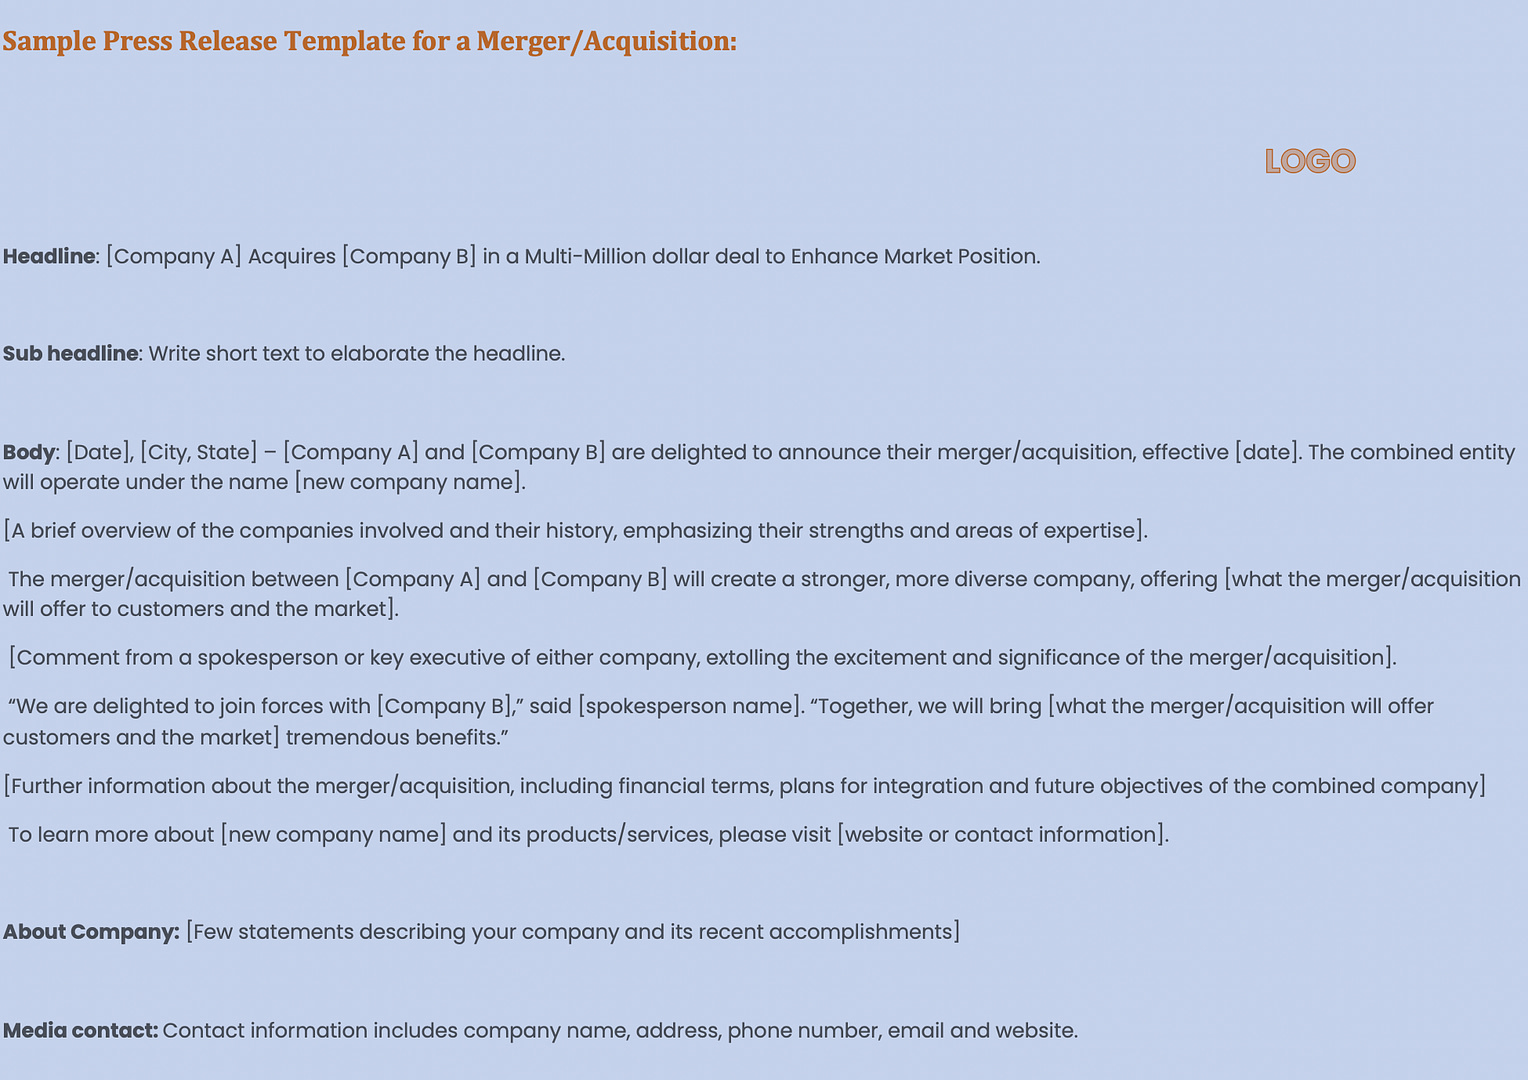 Press Release Template for a Merger/Acquisition